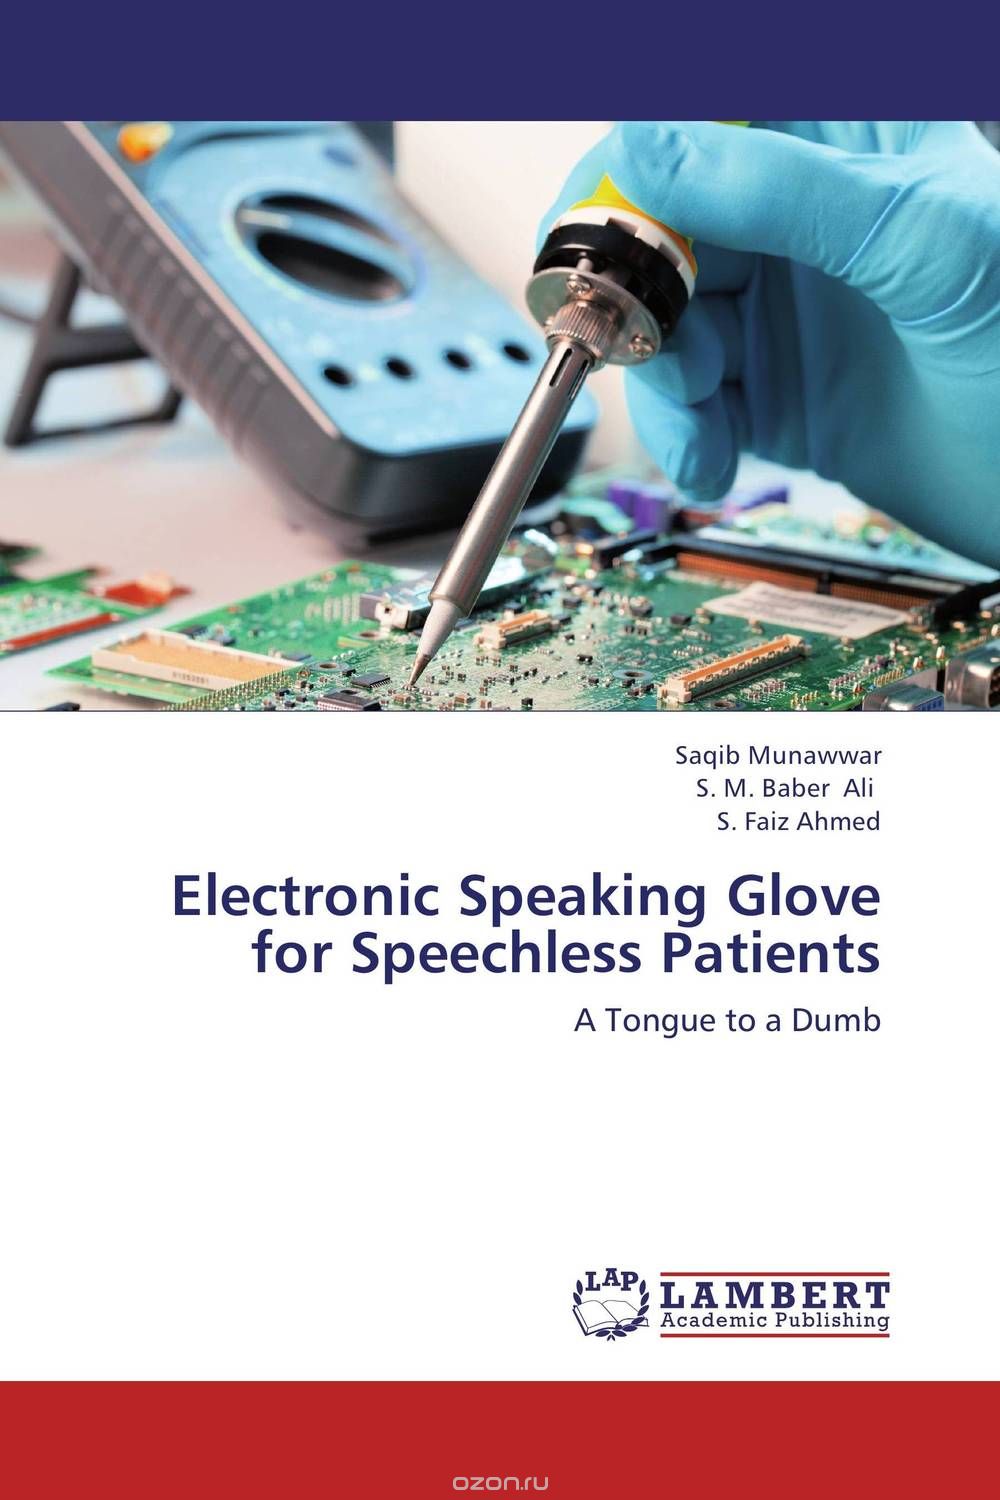 Electronic Speaking Glove for Speechless Patients